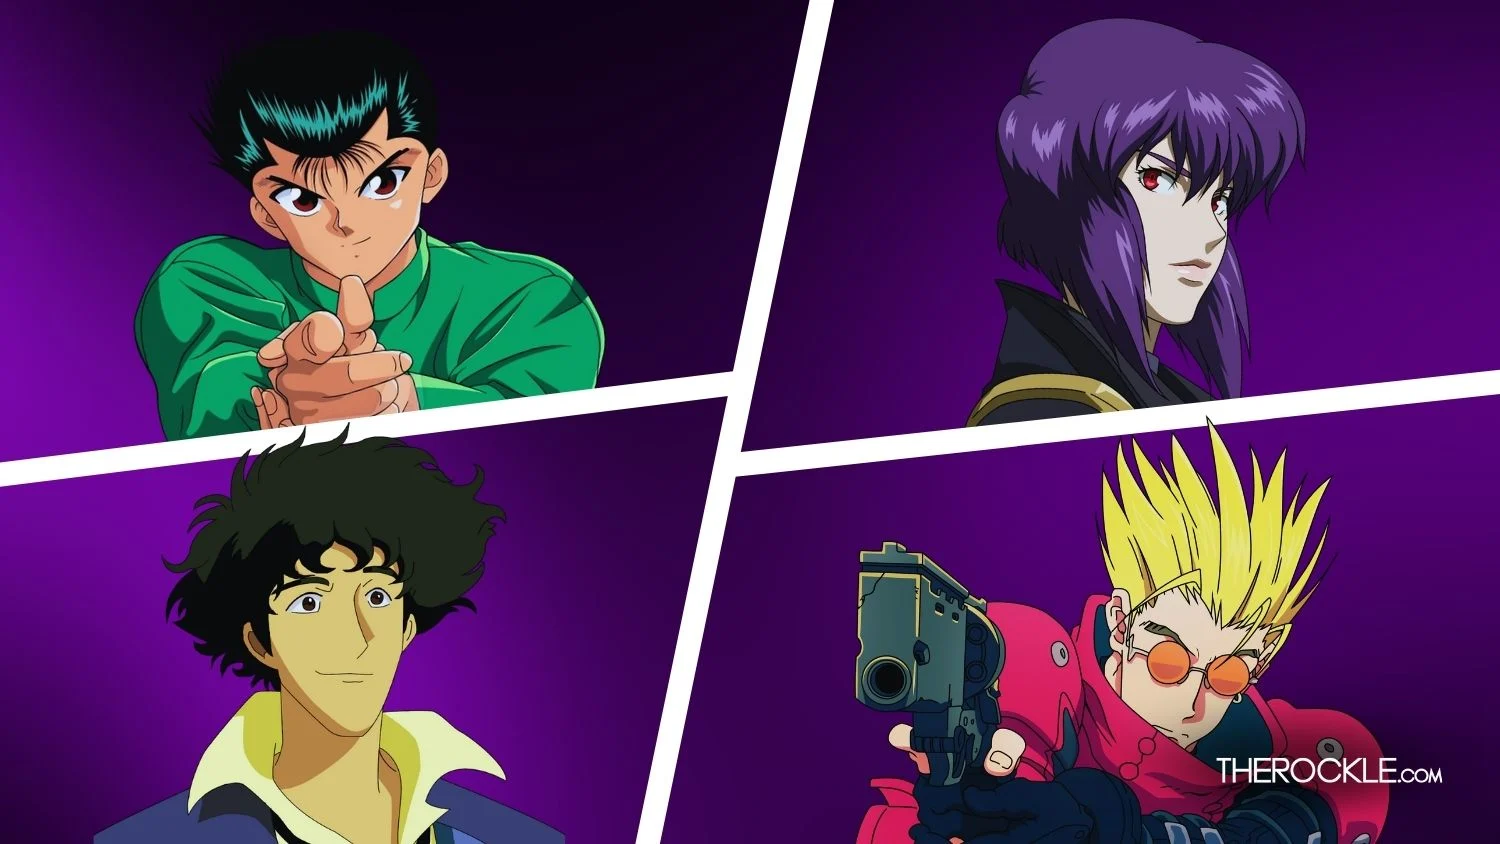 A collage of 1990s anime heroes